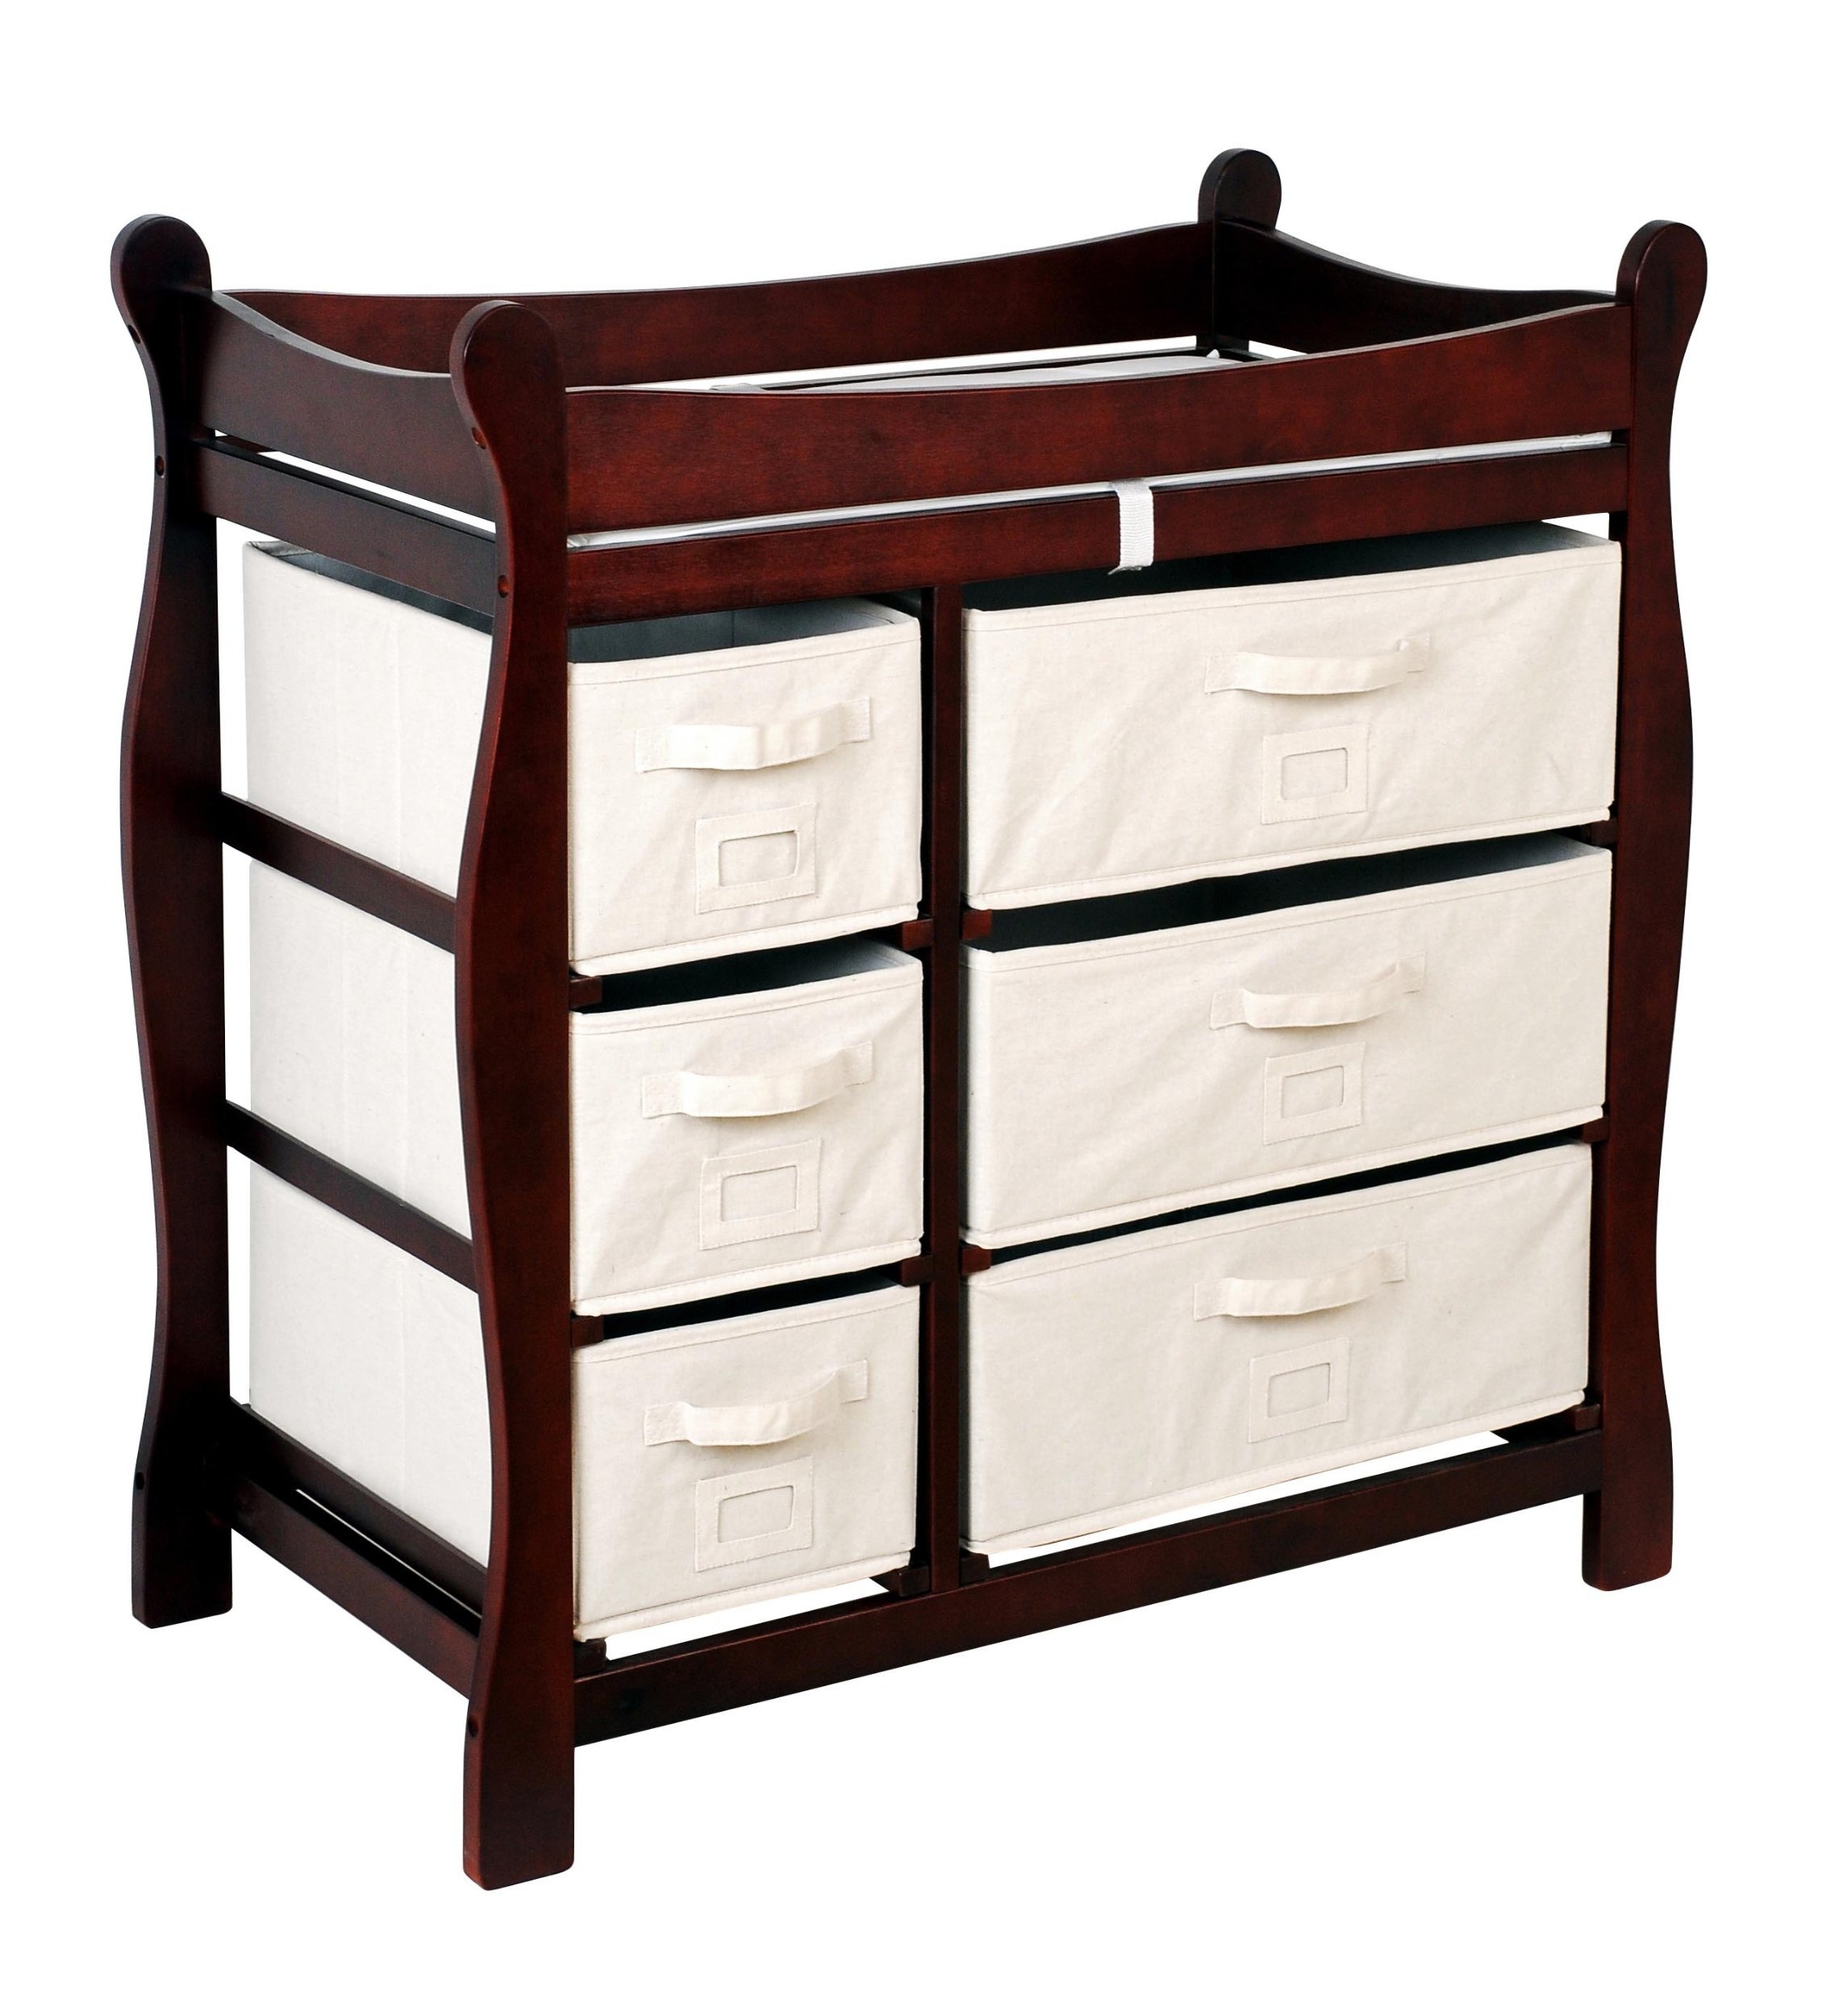 Sleigh Style Baby Changing Table with 6 Baskets